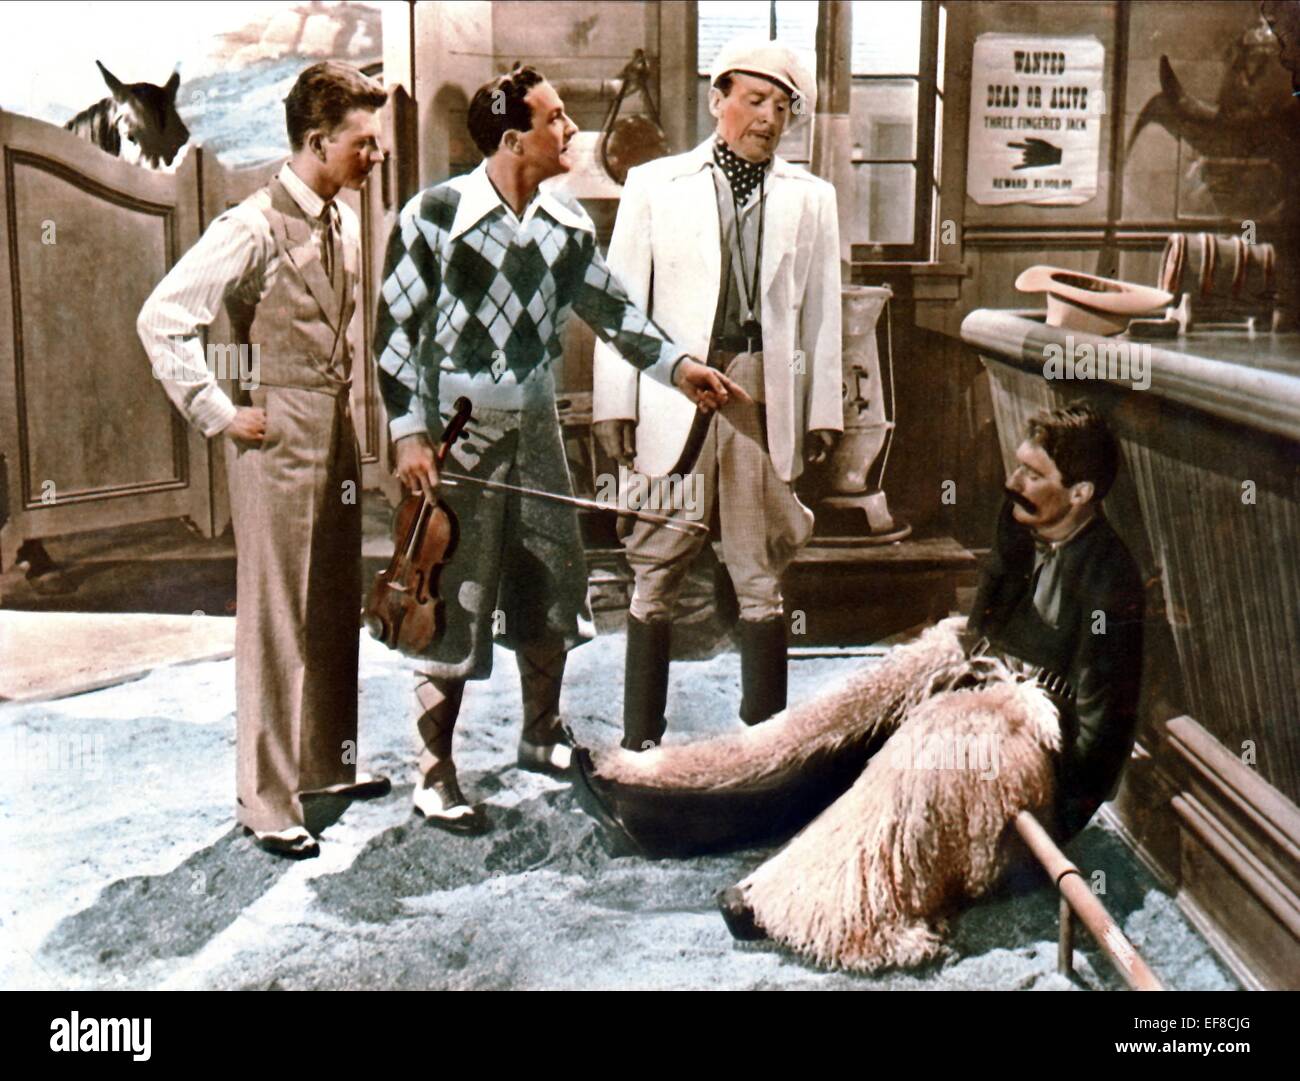 DONALD O'CONNOR, Gene Kelly, DOUGLAS FOWLEY, Singin' in the Rain, 1952 Banque D'Images